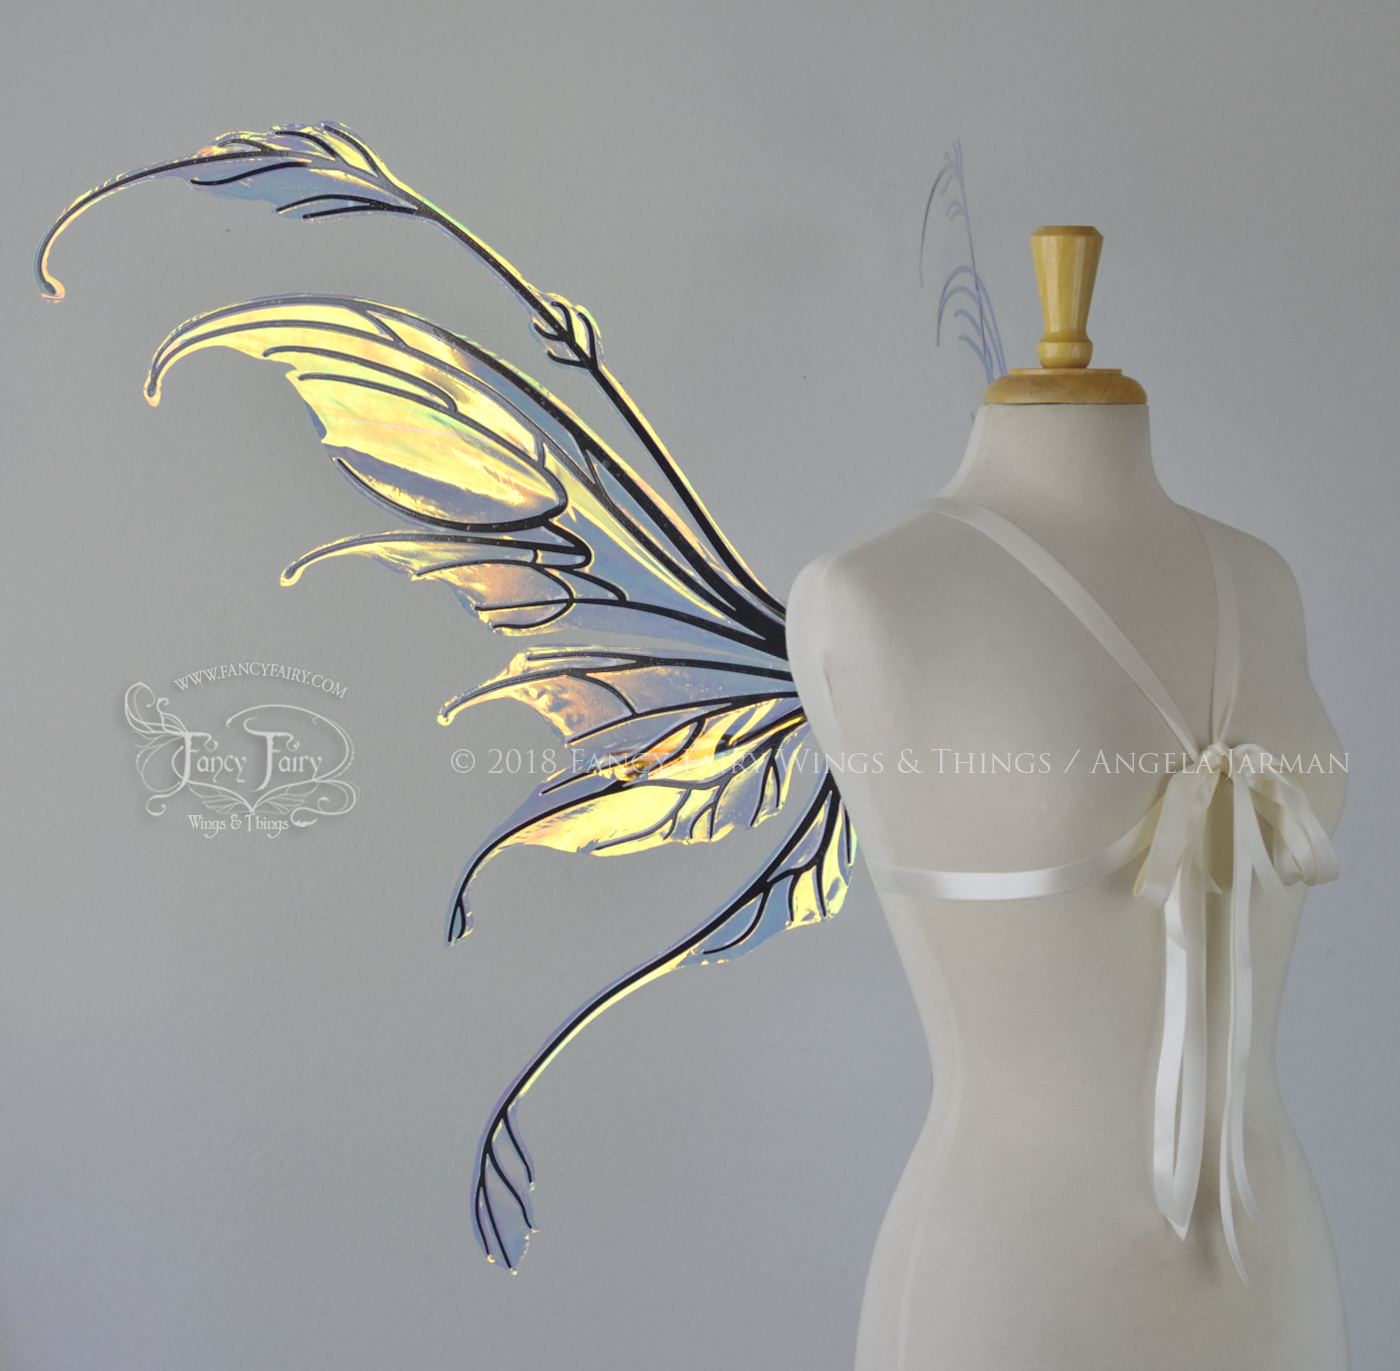 Fauna Iridescent Convertible Fairy Wings in Clear Diamond Fire with Black veins